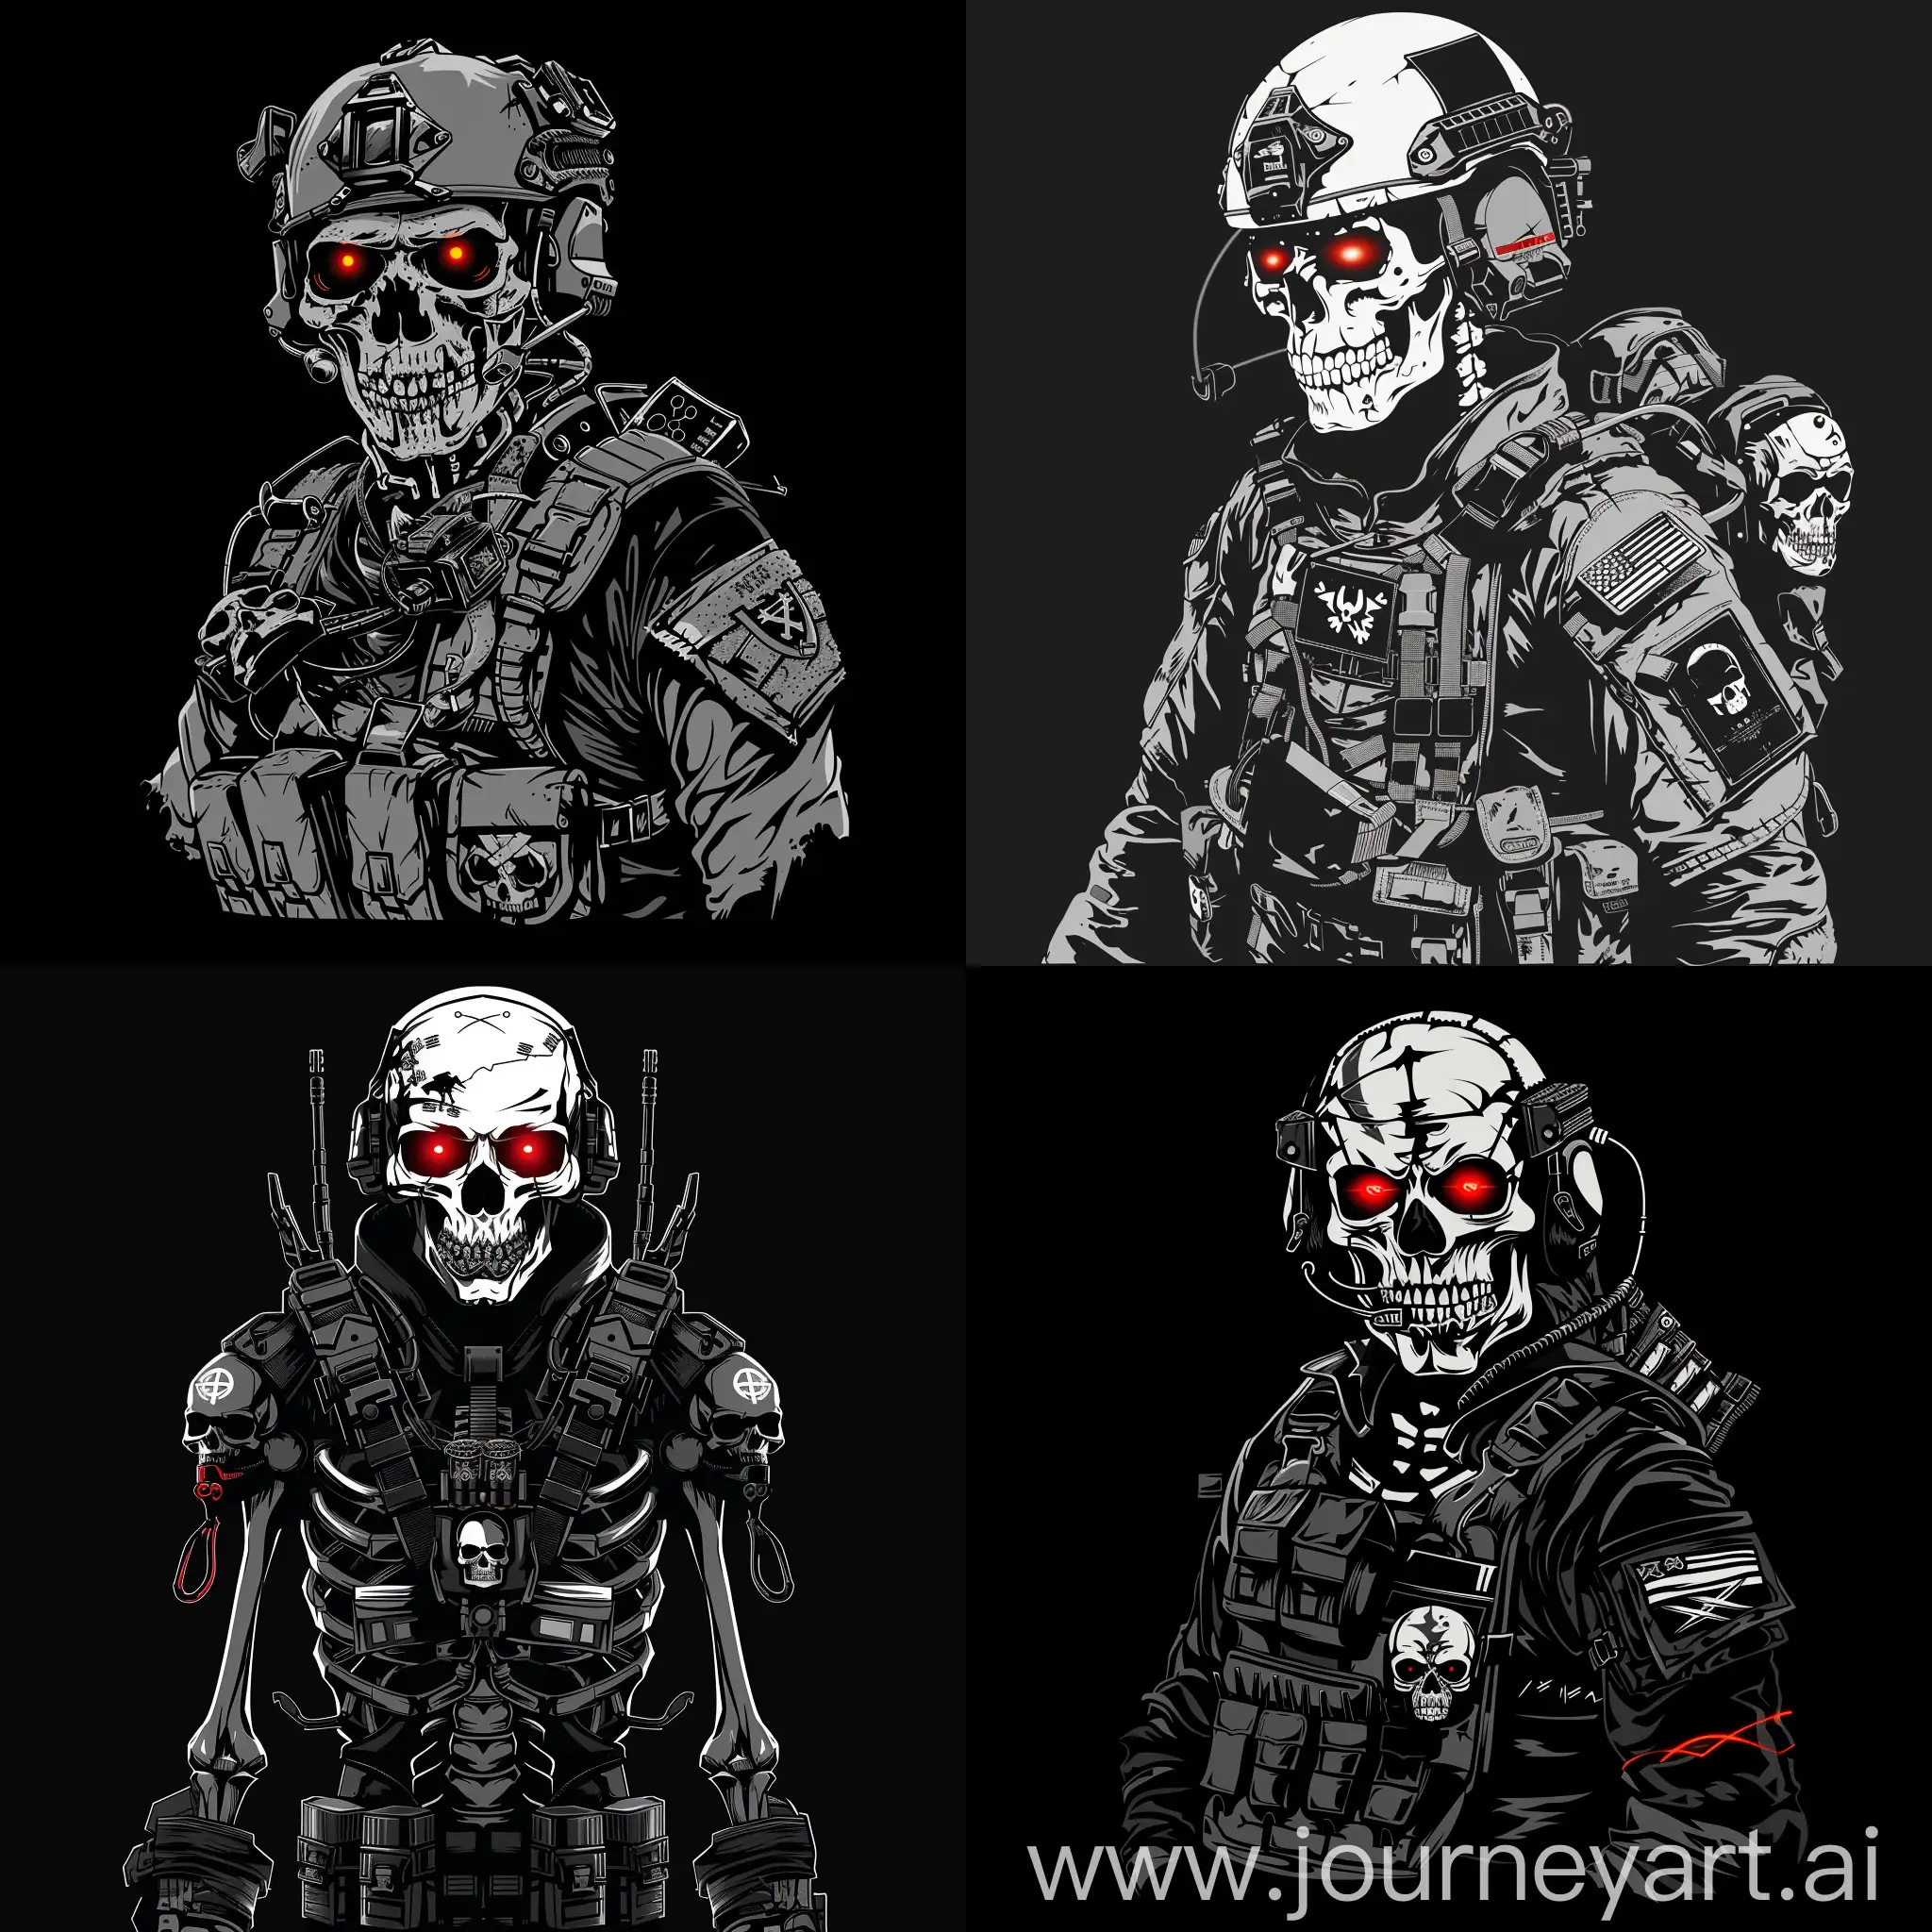 5 undead soldier look like a skeleton with modern military equipment, logo, glowing red eyes, skulls, black and white, black background